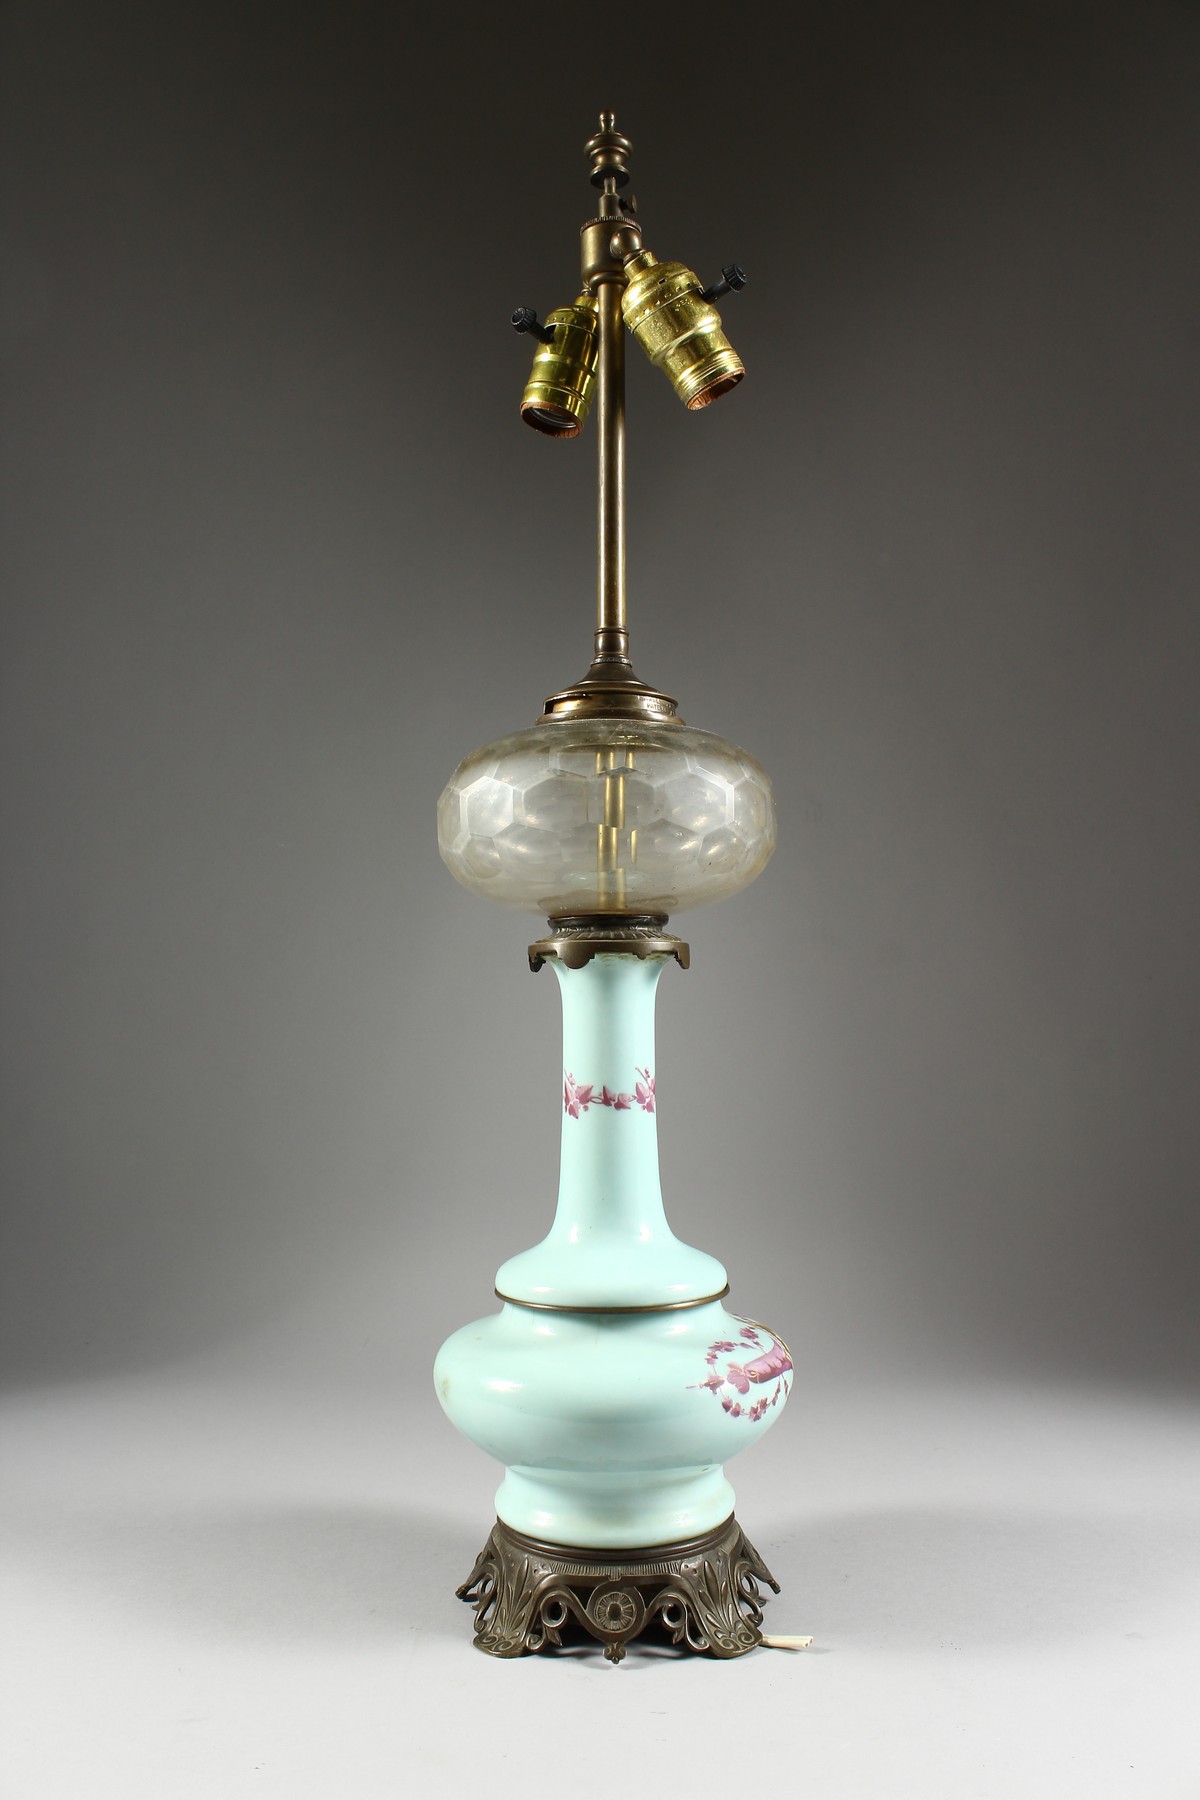 A VICTORIAN OPALINE LAMP with glass reservoir and metal mounts. 26ins high overall. - Image 5 of 7